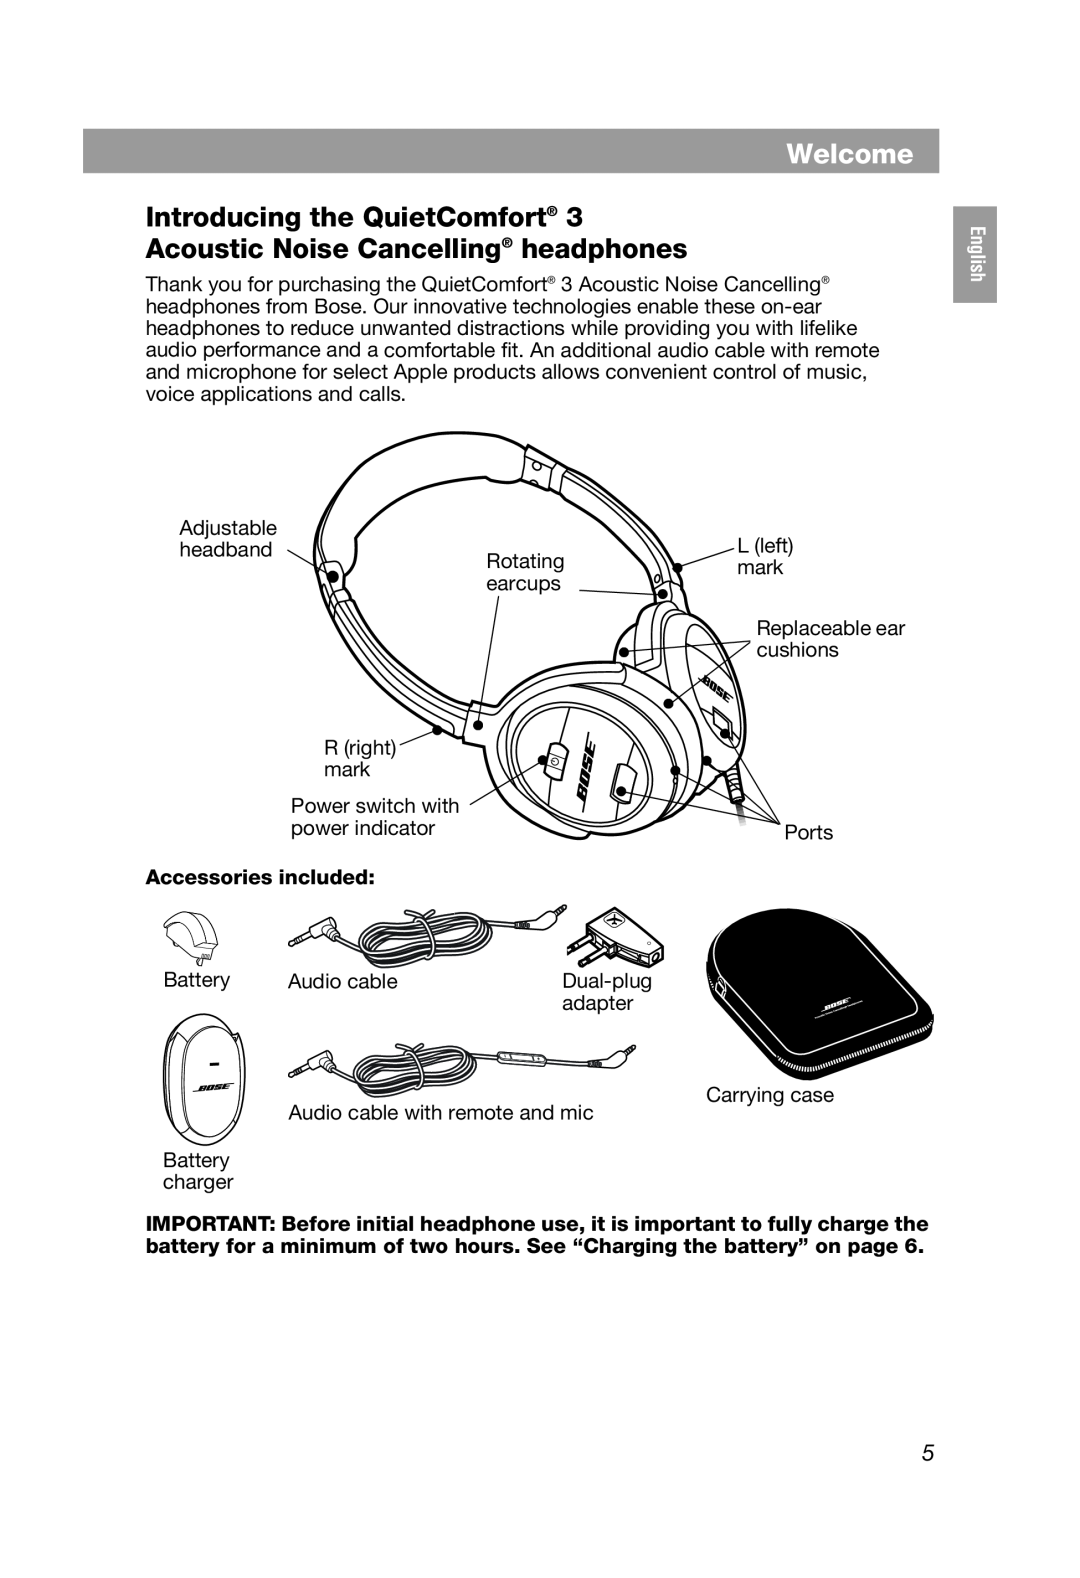 Bose QC3 manual Welcome, Introducing the QuietComfort, Acoustic Noise Cancelling headphones, Accessories included, Français 